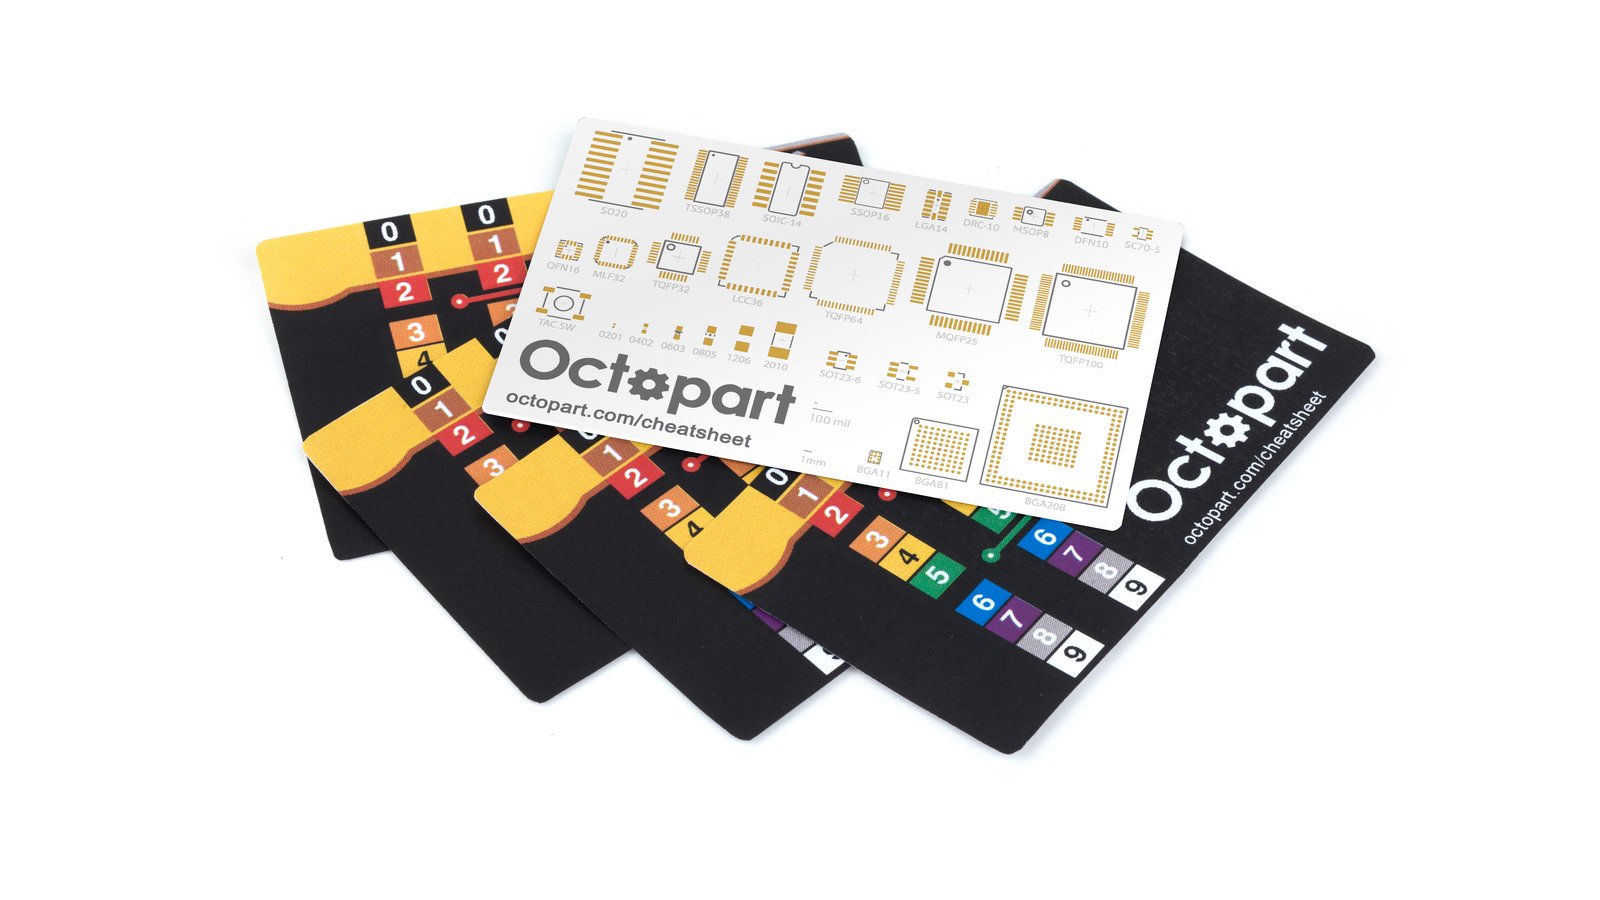 Octopart Pocket Electronics Reference PCB